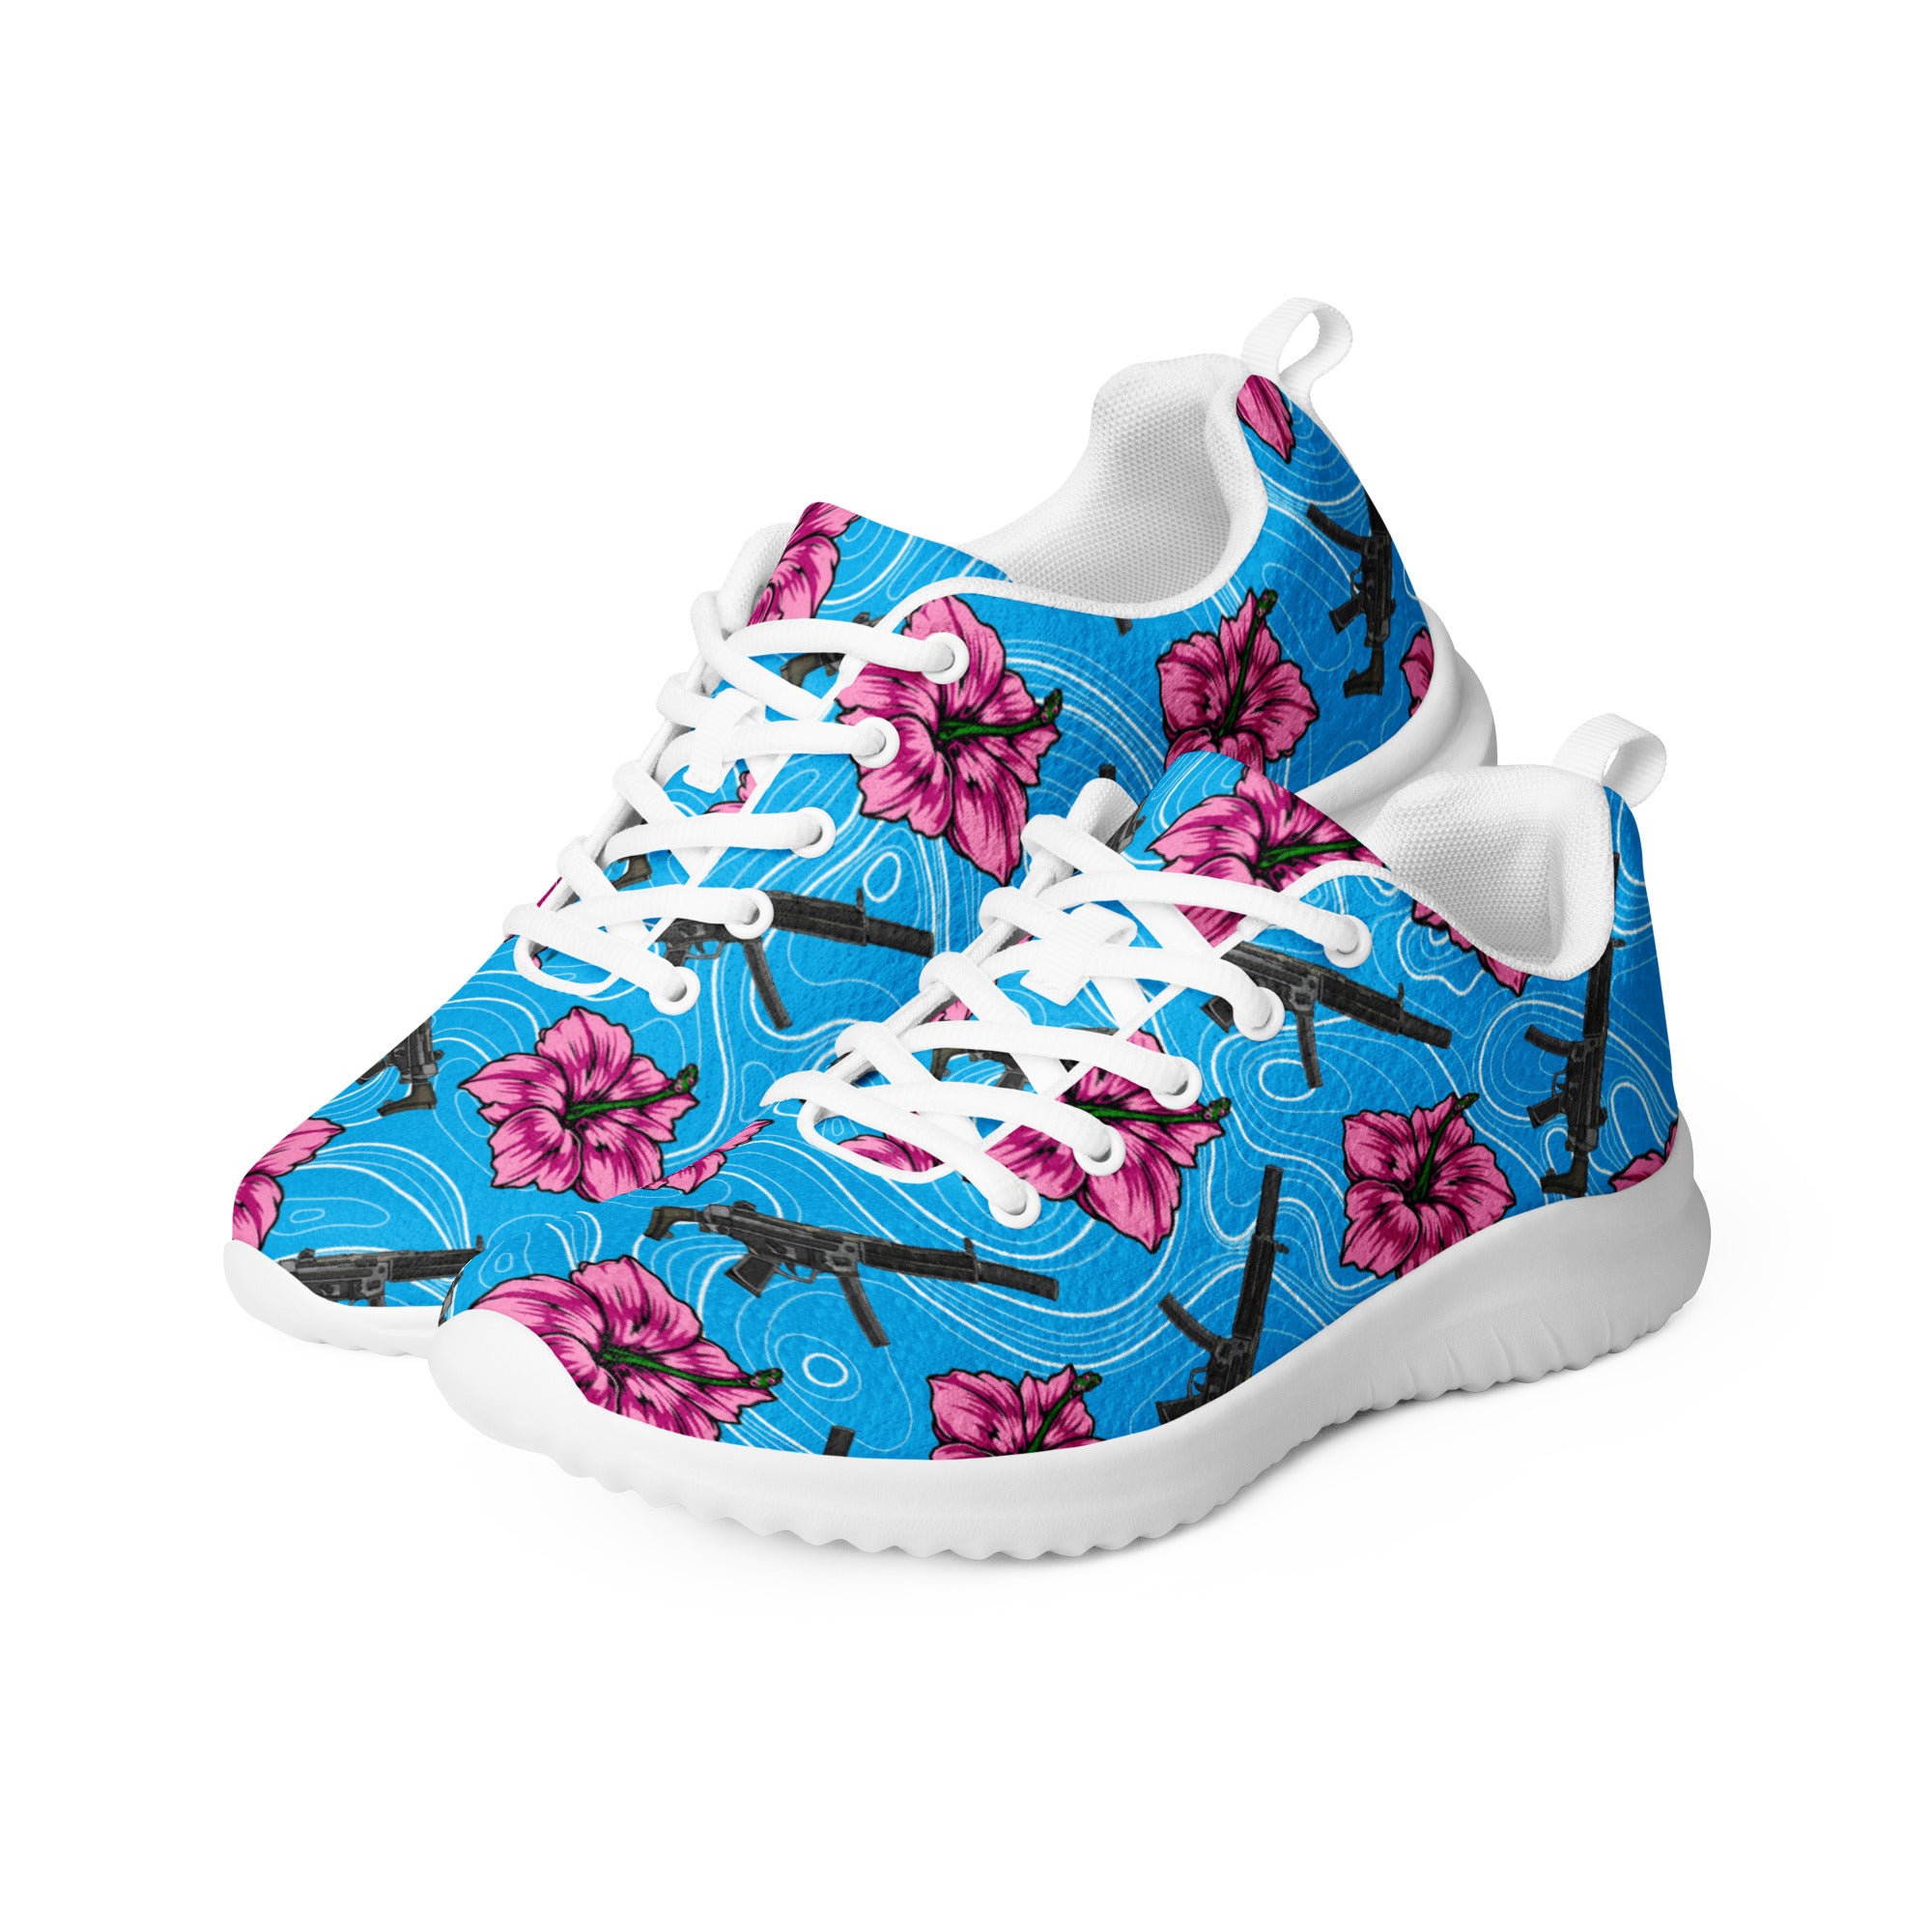 Rad Palm High Capacity Hibiscus Blue Women’s Athletic Shoes